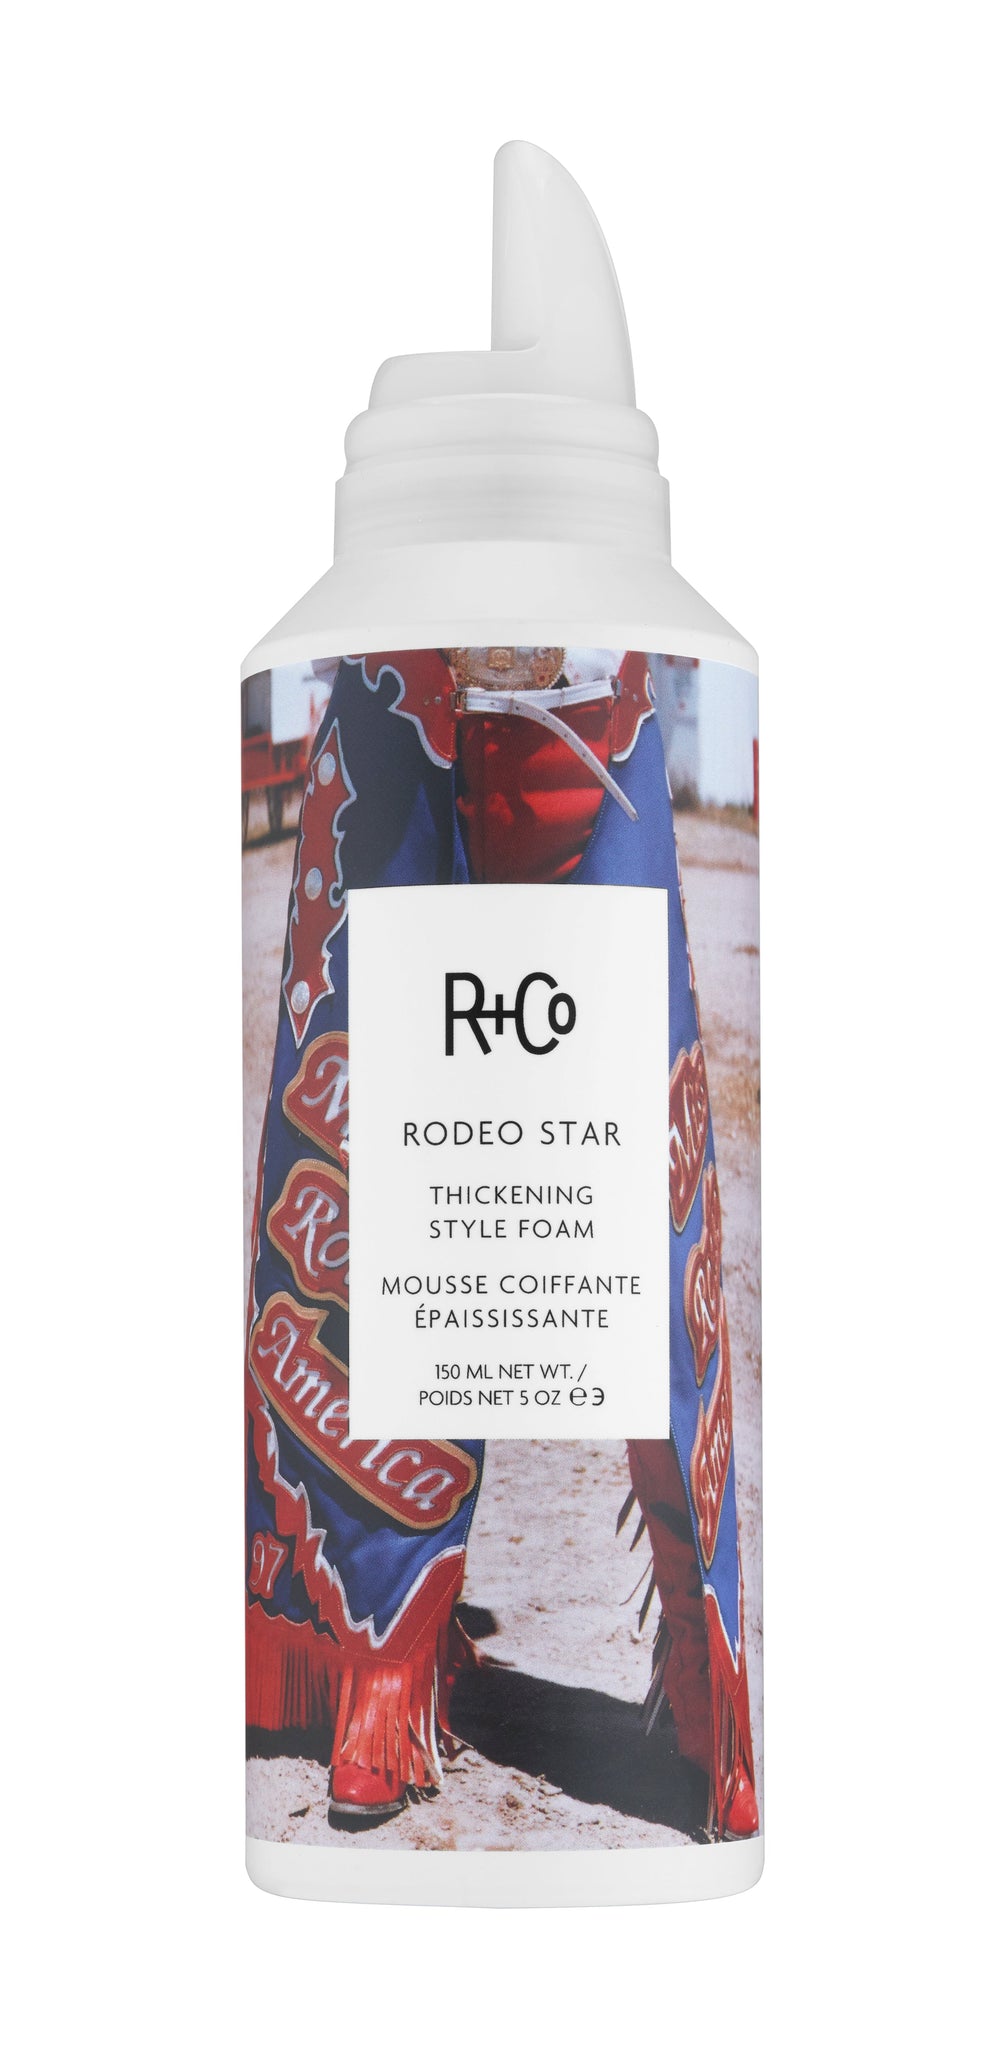 R+Co RODEO STAR / Thickening Style Foam 147ml